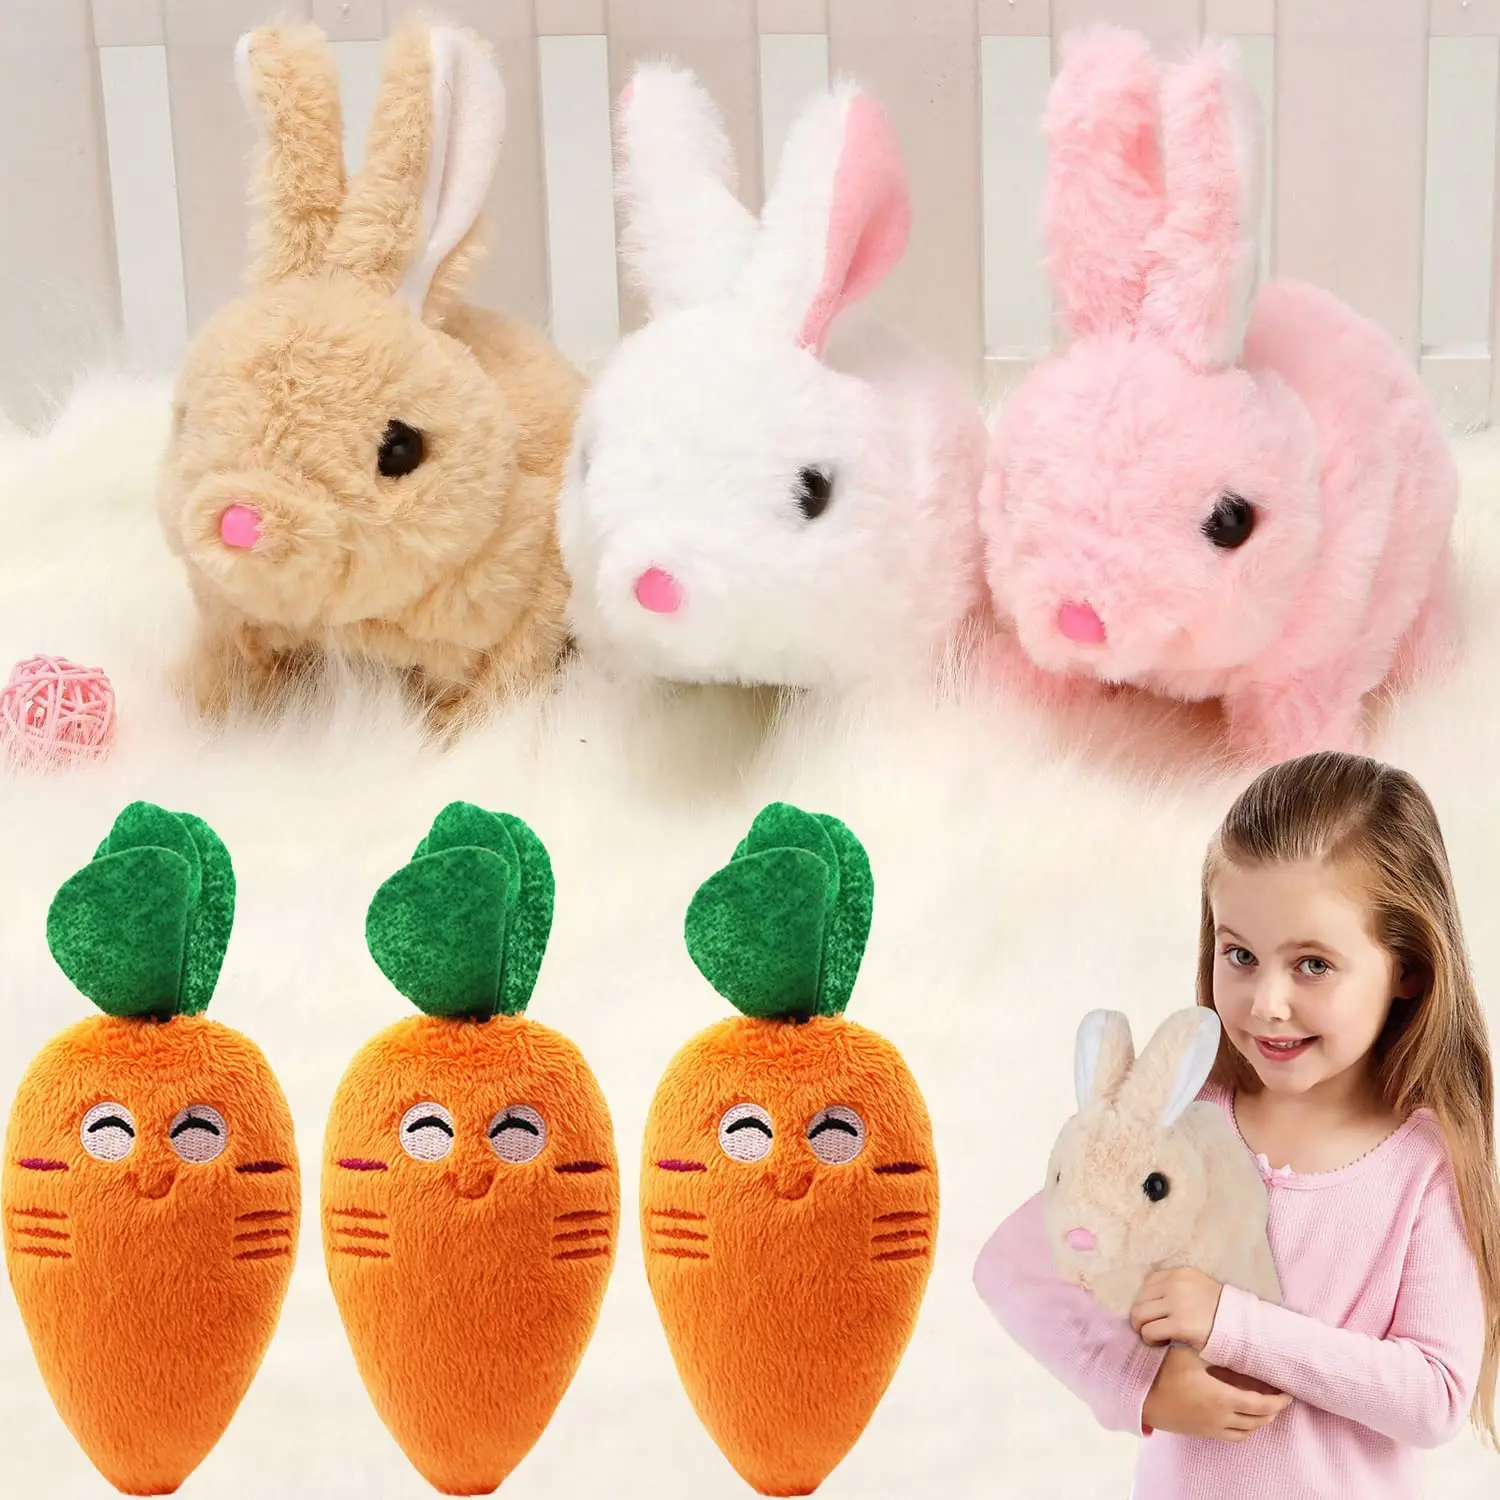 Bunny Toys Educational Interactive Toys Bunnies Can Walk and Talk, Easter Plush Stuffed Bunny Toy Walking Rabbit Educational Toy bee shape walking clockwork wind up plastic kids toy early educational gift